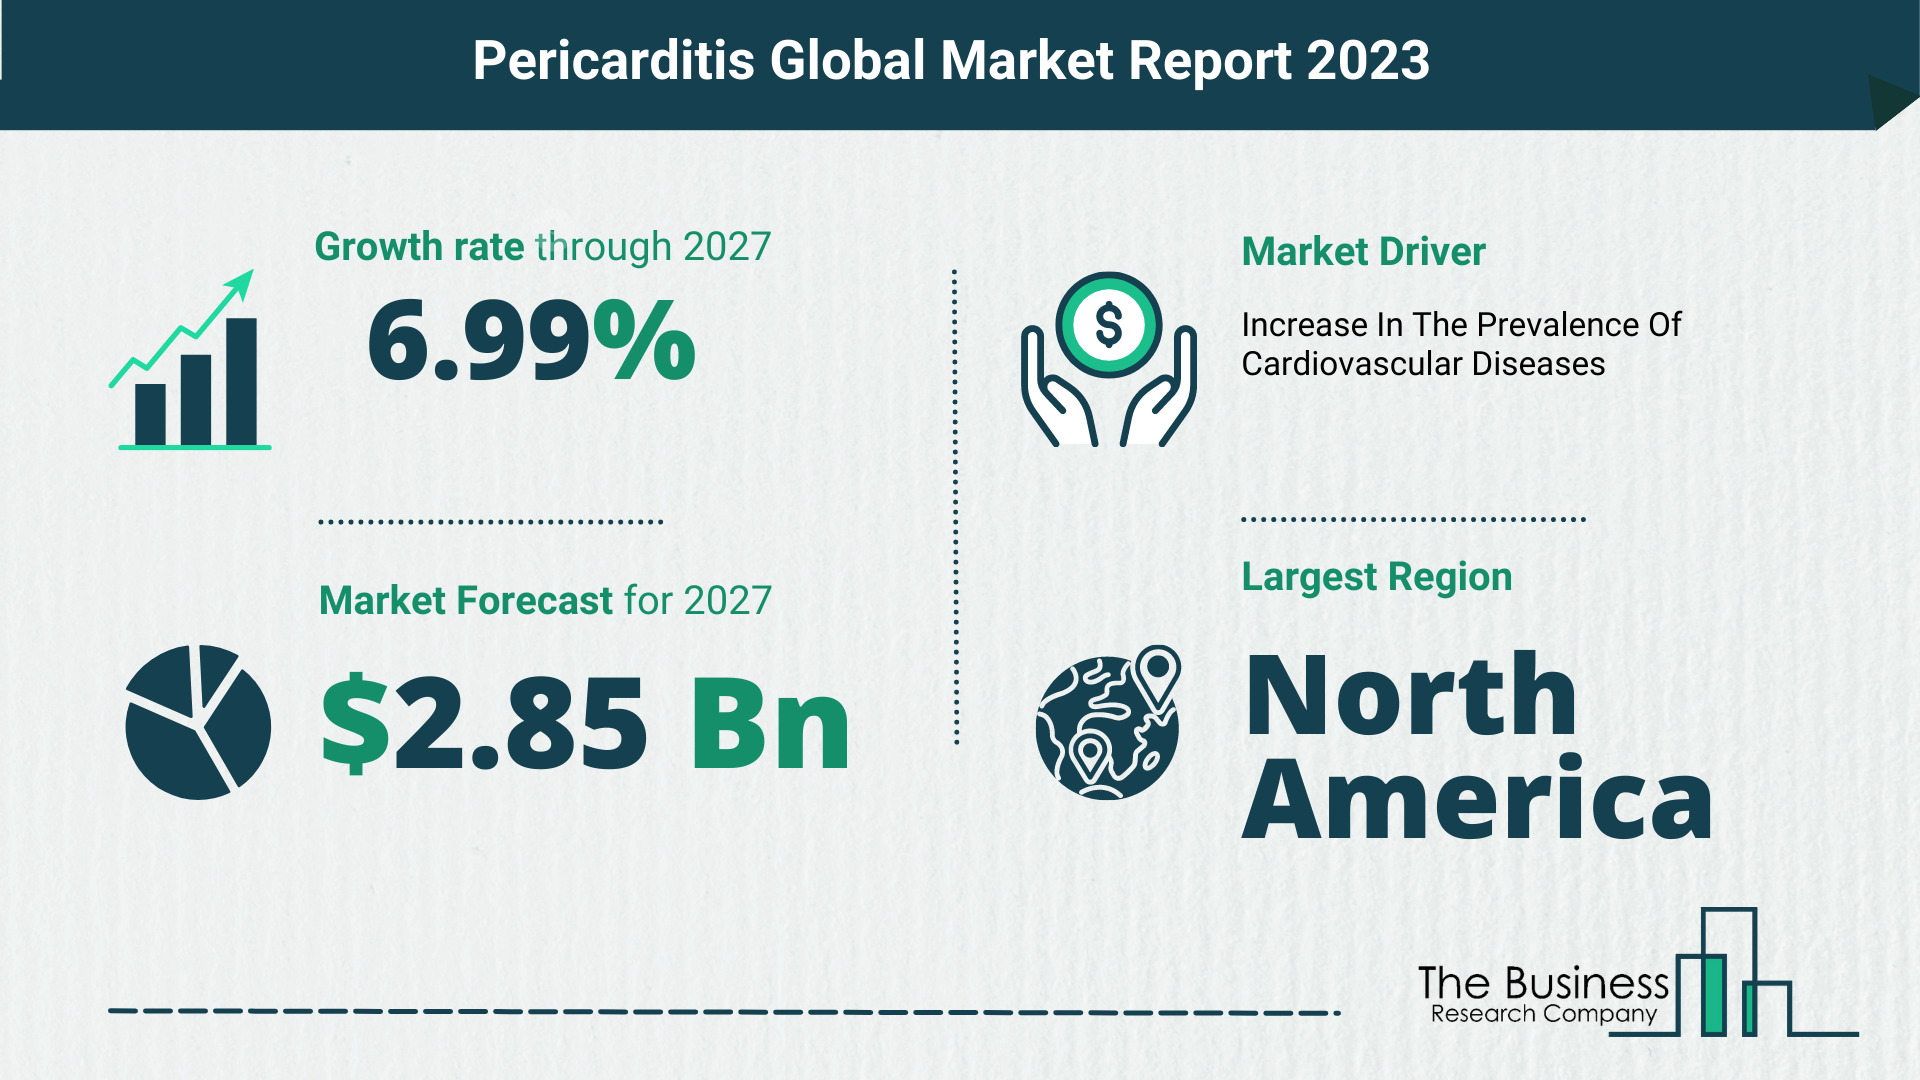 Global Pericarditis Market Opportunities And Strategies 2023